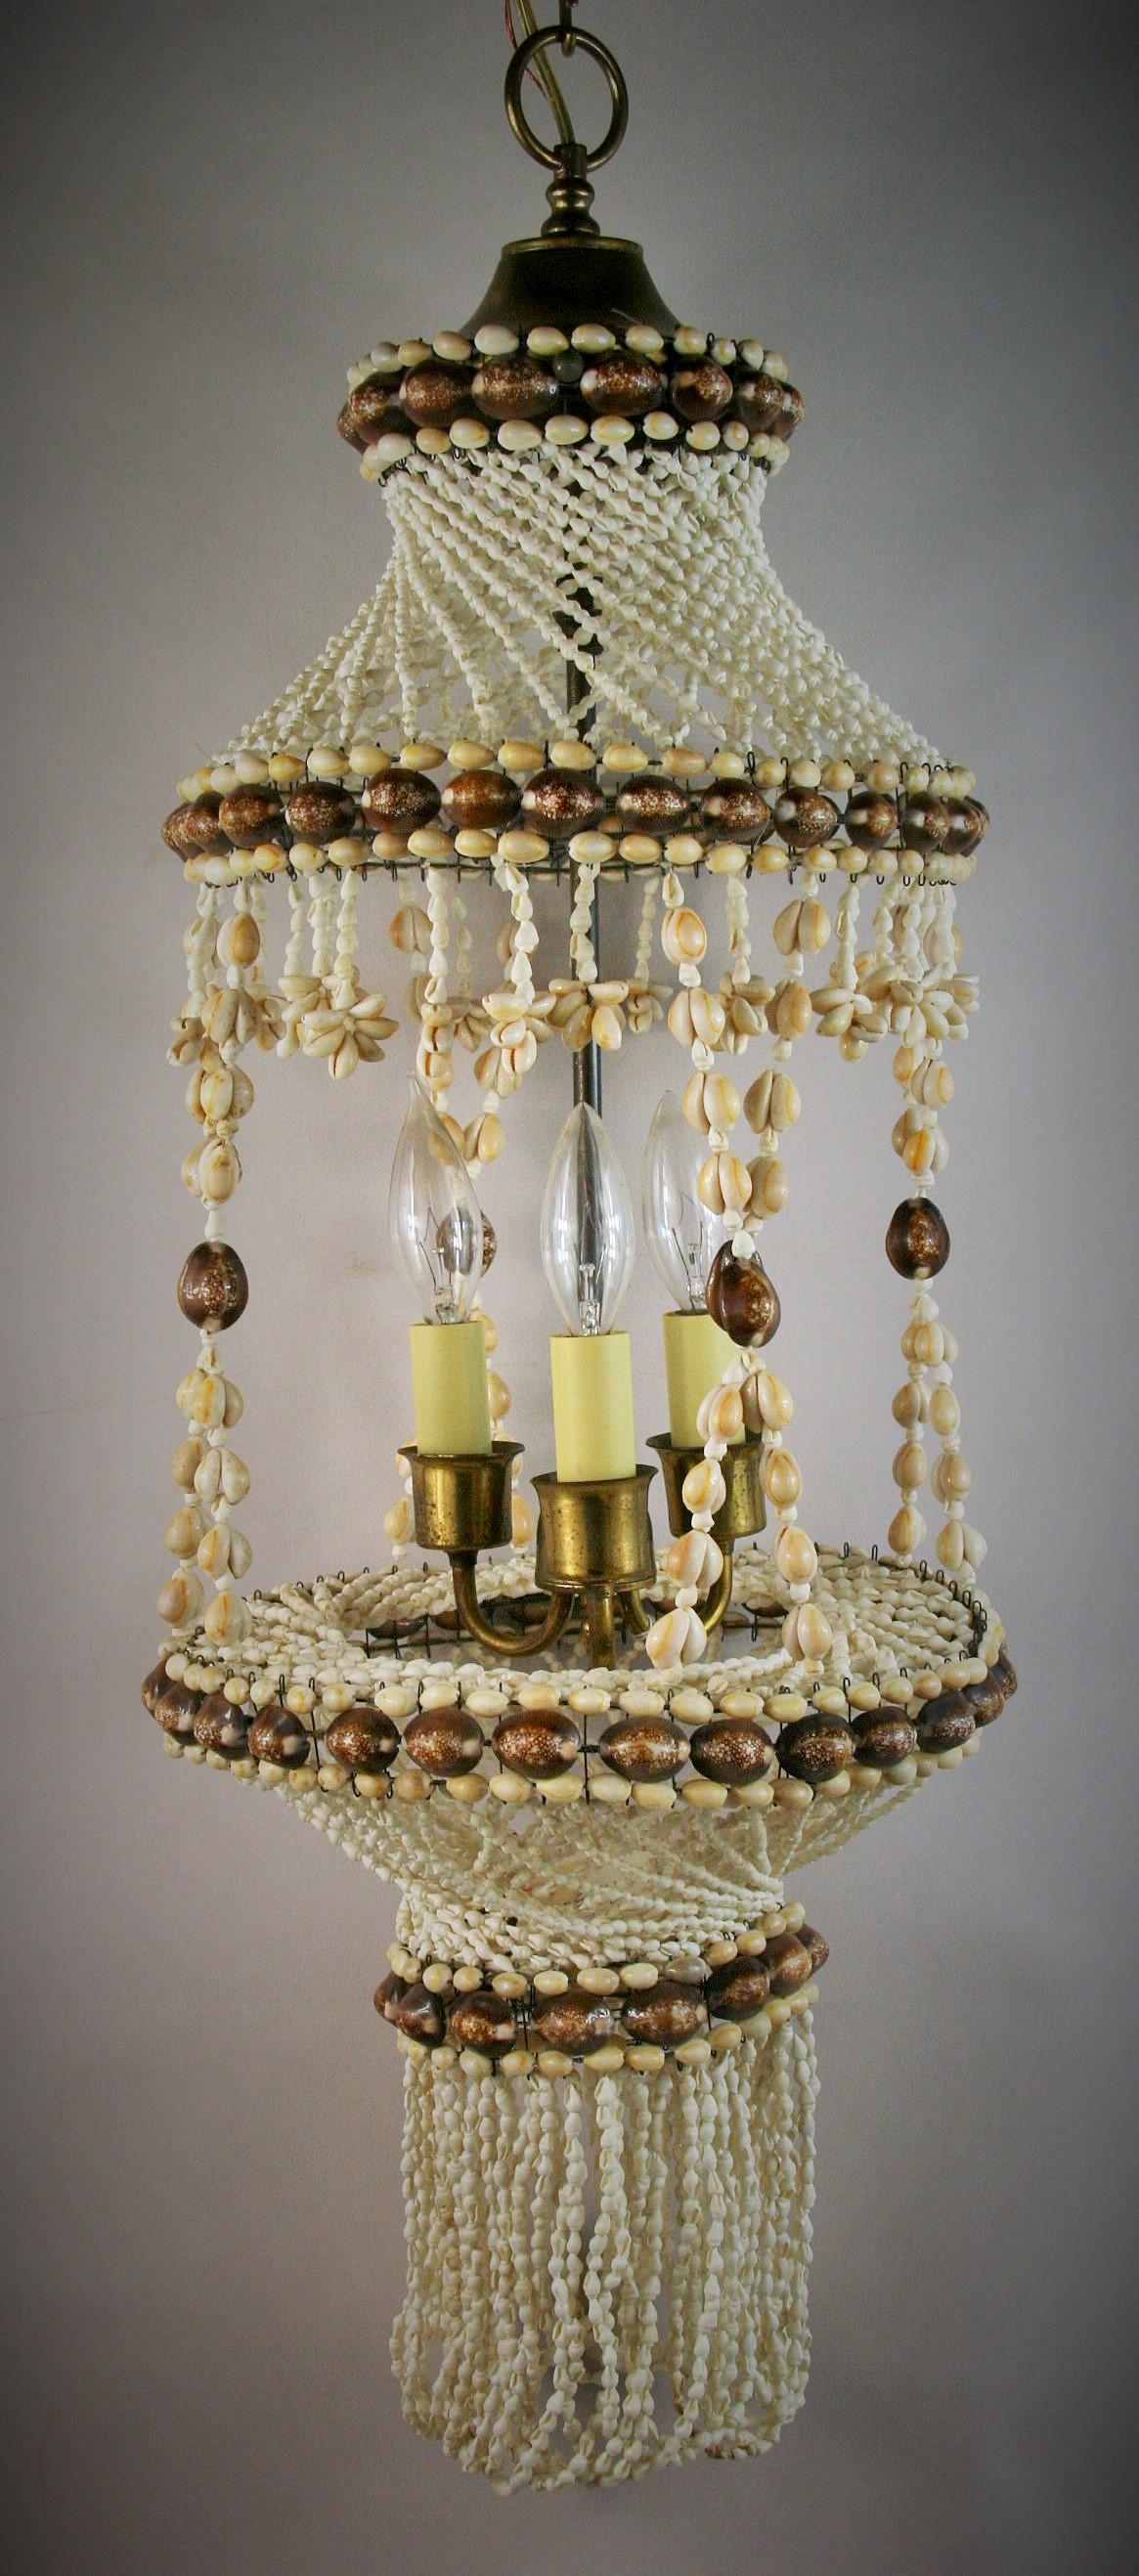 3-417 sea shell 3 light hanging pendant light
Made from various sizes and colored sea shell from the Philippines
Brass hardware
Takes 3 candelabra base bulbs 60 watt max.